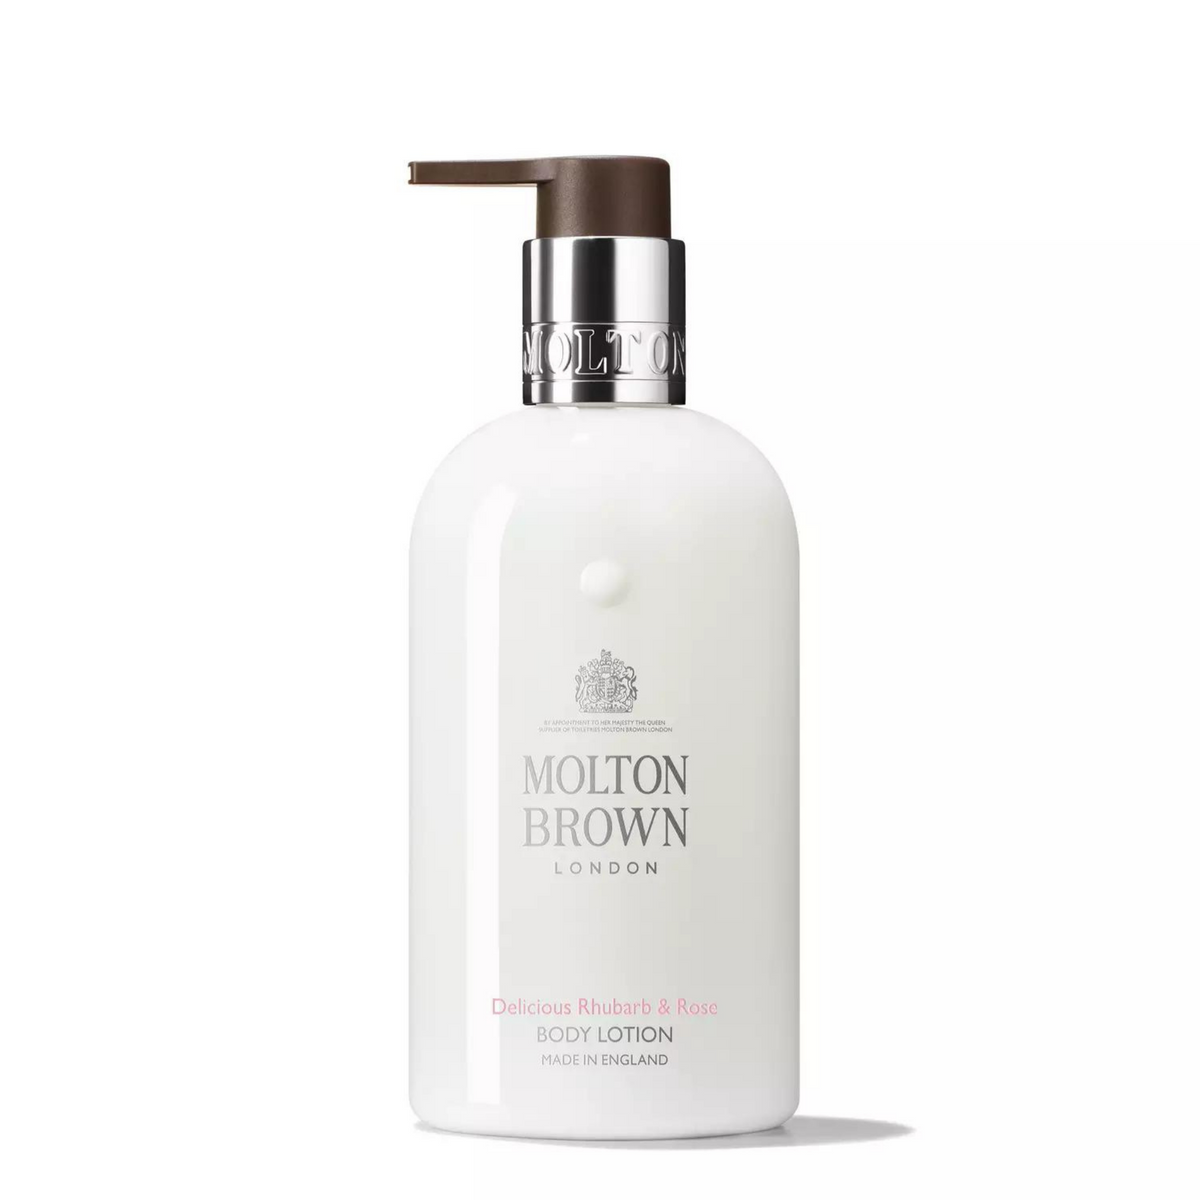 Primary Image of Delicious Rhubarb & Rose Body Lotion